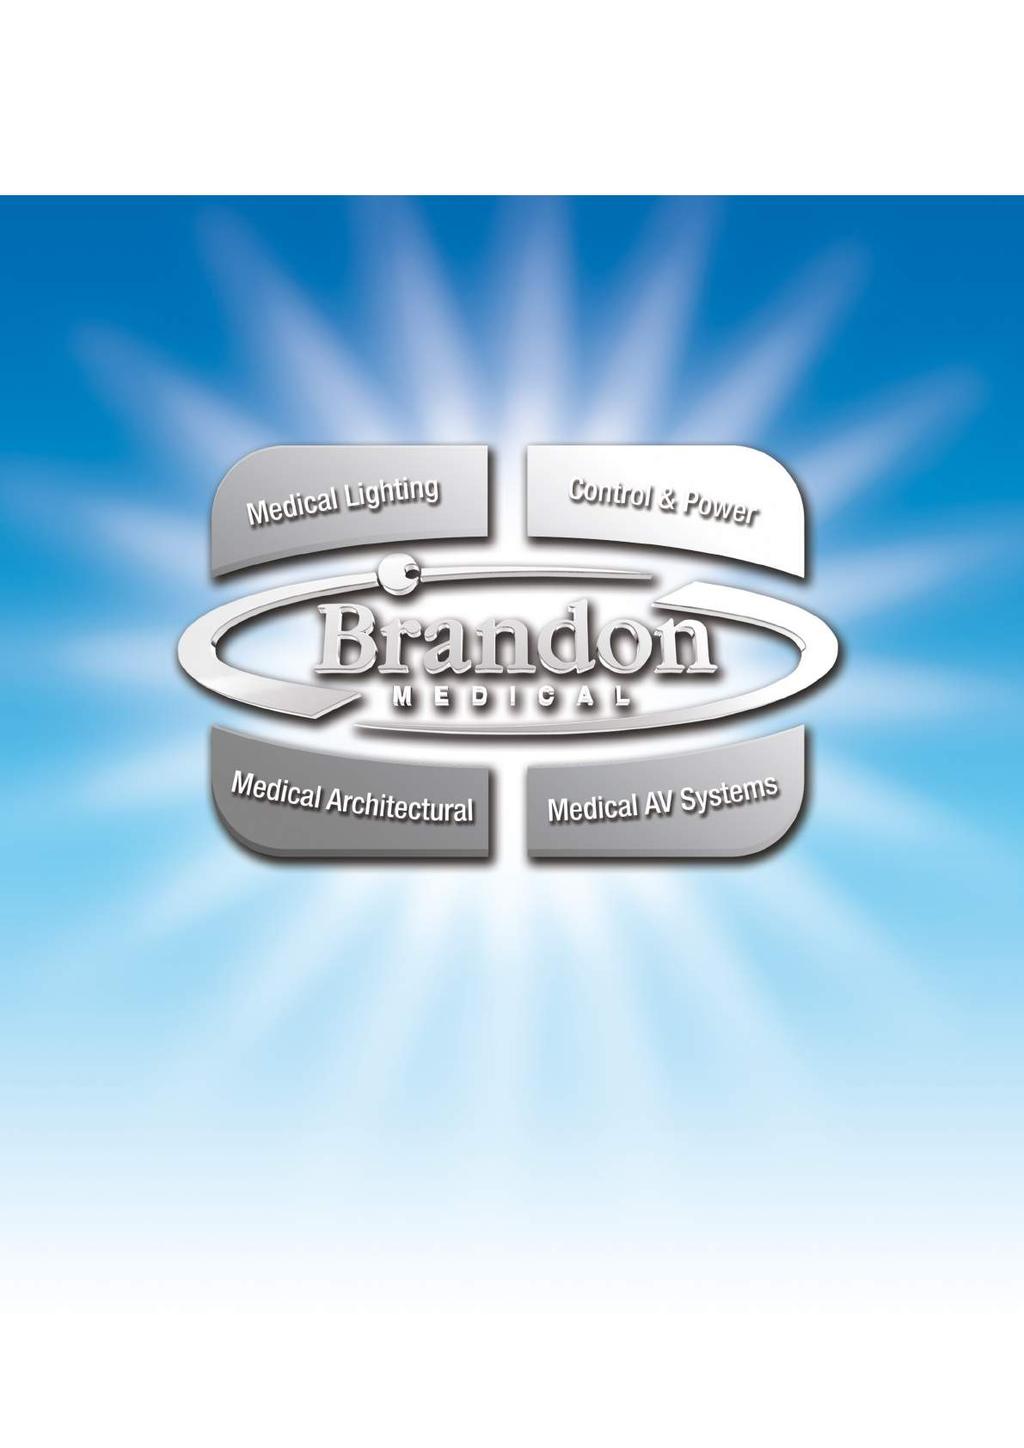 IPS/UPS can be associated with Brandon Medical s wide range of products.